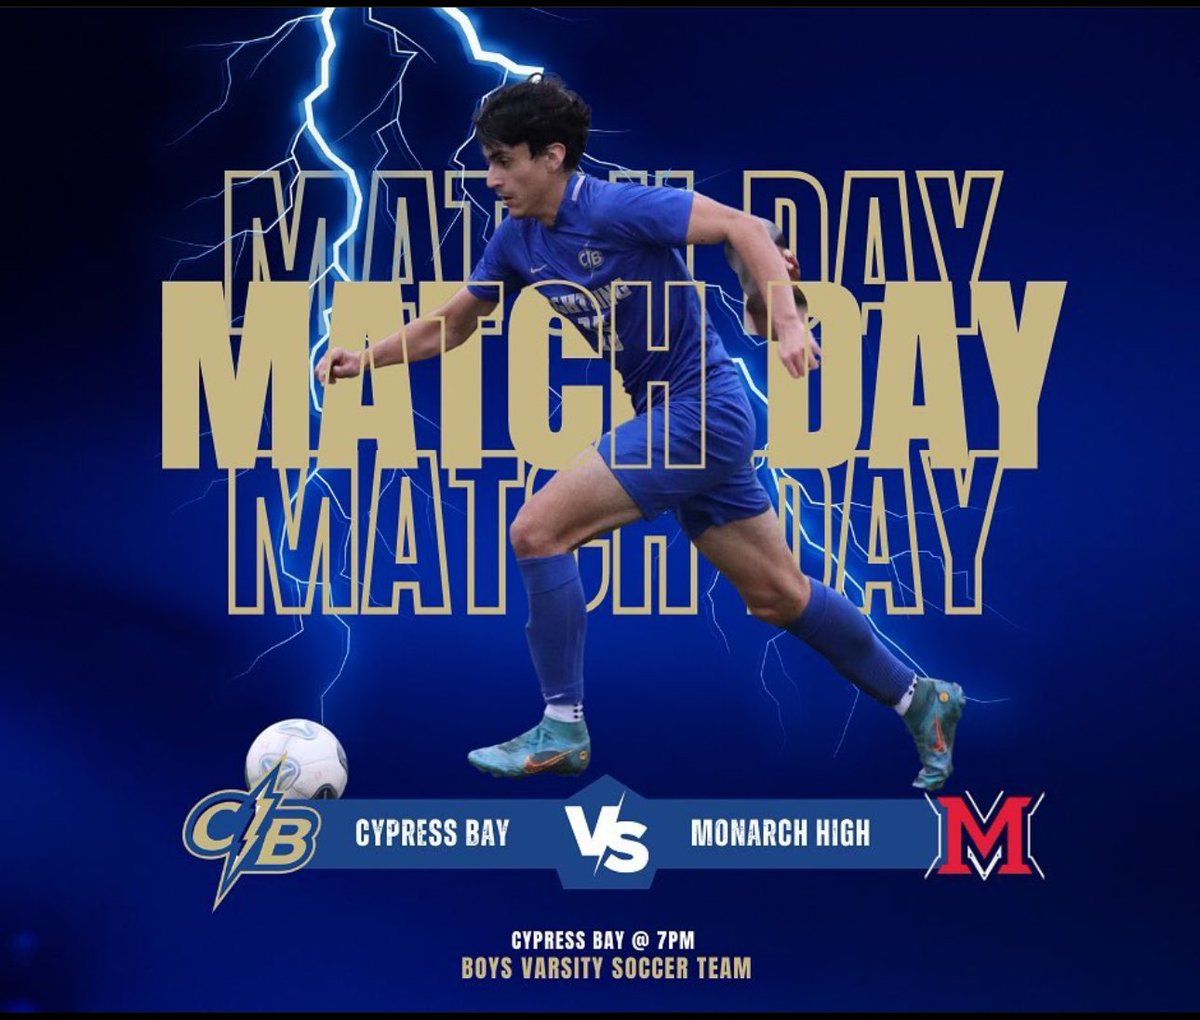 Come out and support our soccer teams at home tonight in regional quarterfinal action. Girls play at 5PM and boys at 7PM⚡️⚡️